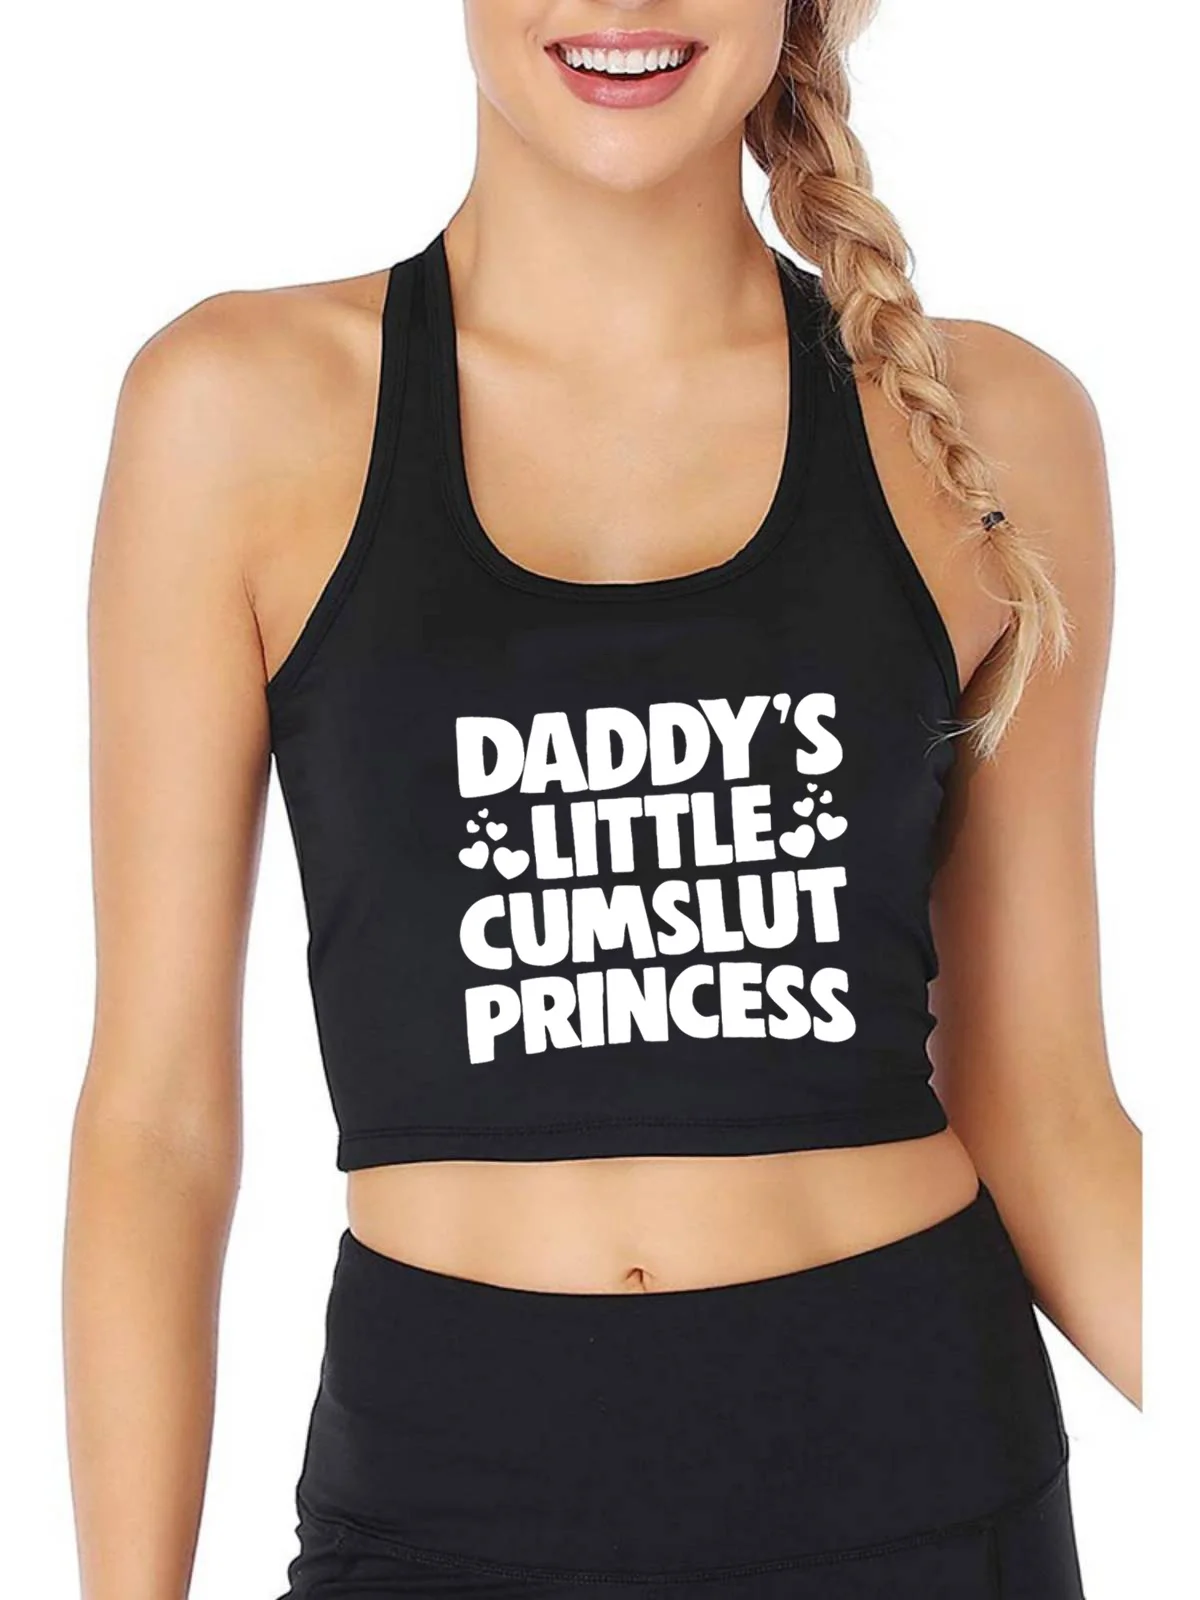 

Daddy's Little Princess Design Breathable Slim Fit Tank Top Adult Humor Fun Flirty Print Crop Tops Summer Camisole Gym Vest